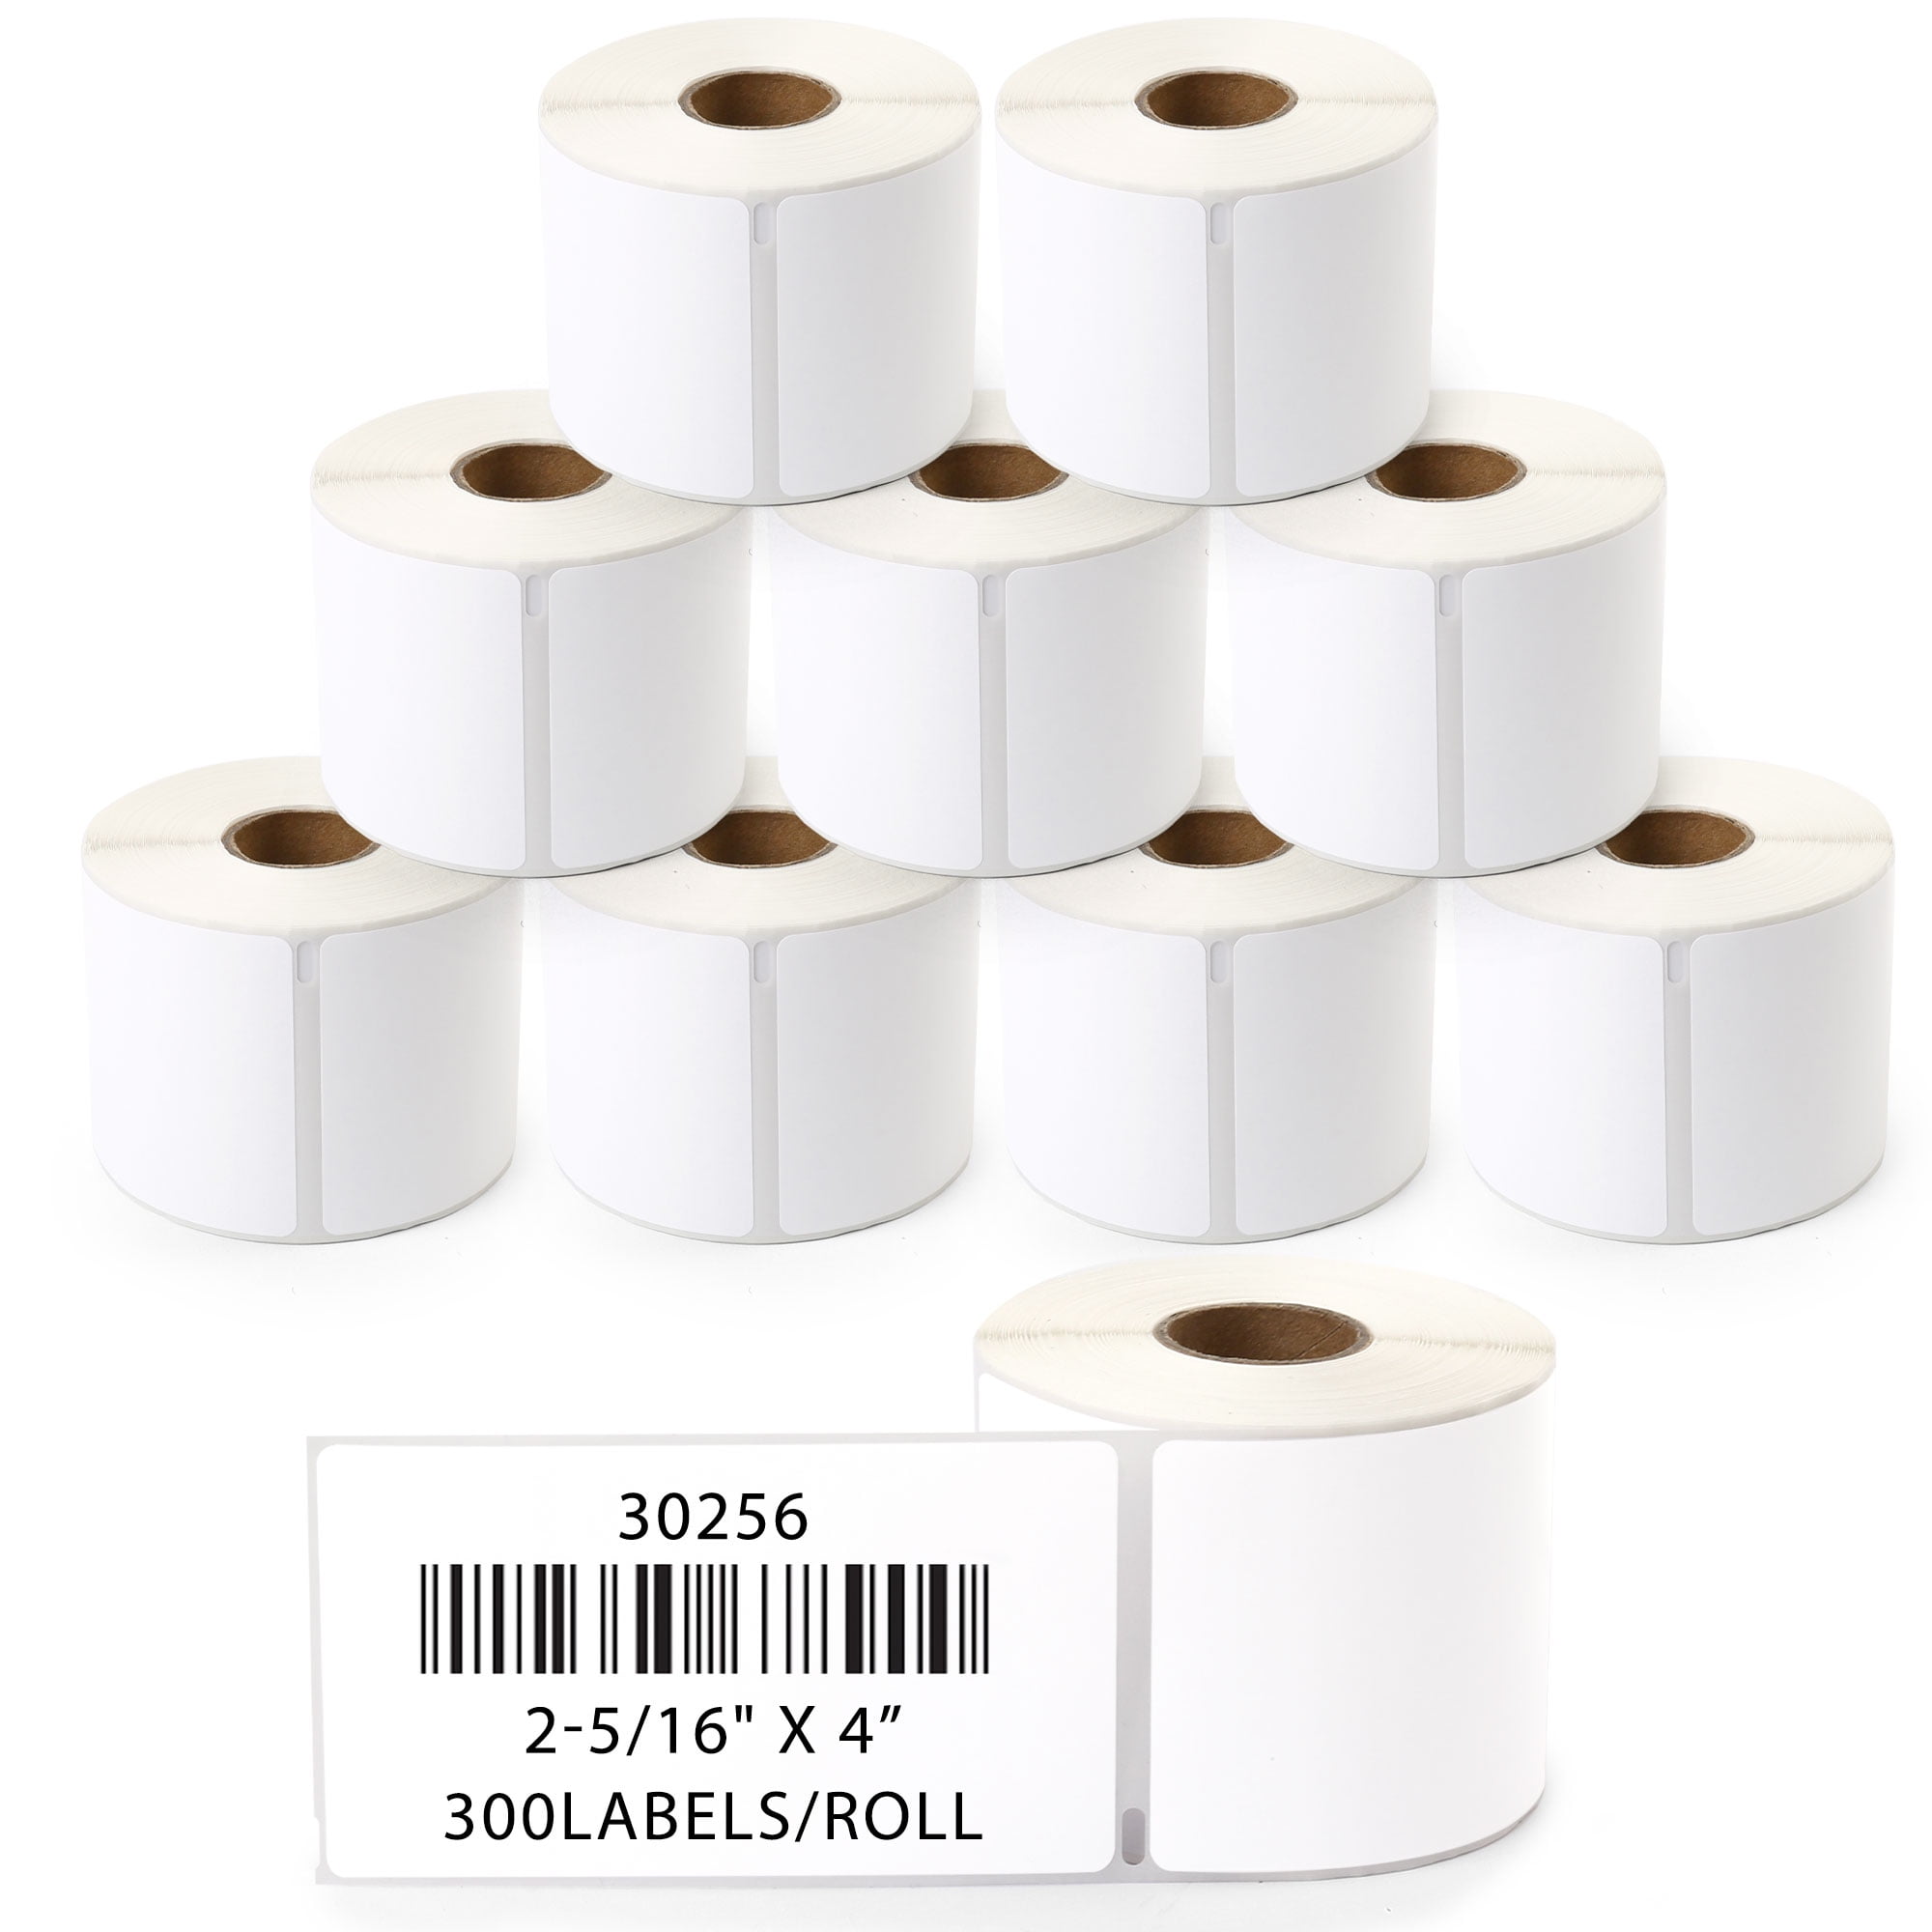 24 Rolls; 6 Rolls of RED YELLOW GREEN & BLUE Shipping Labels For DYMO® LW 30256 